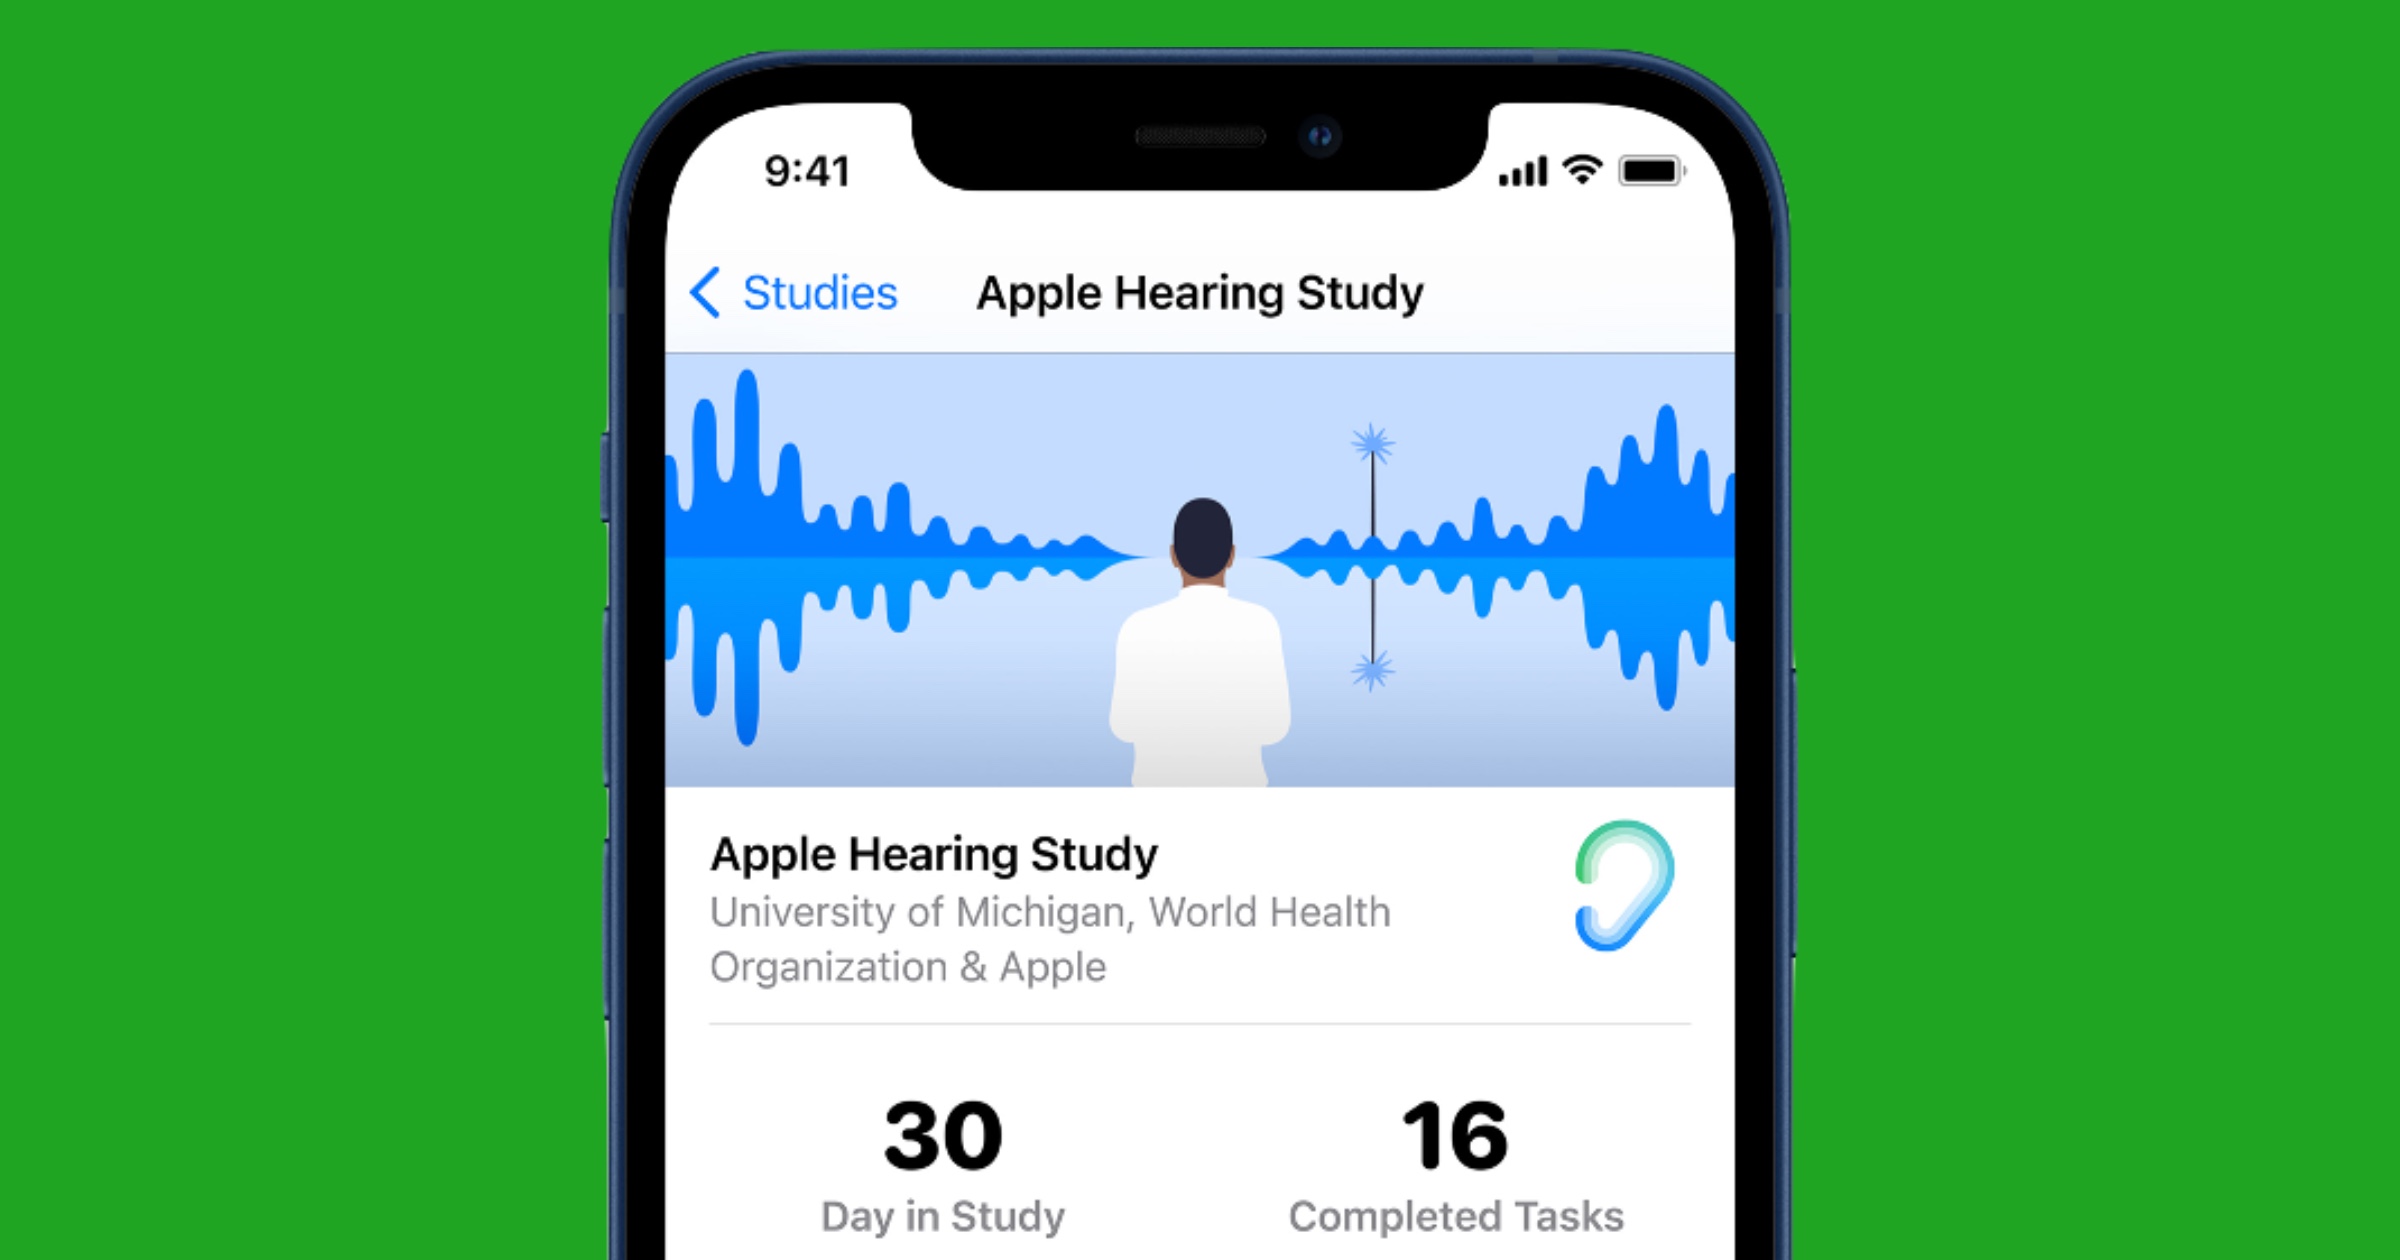 Apple hearing study research app